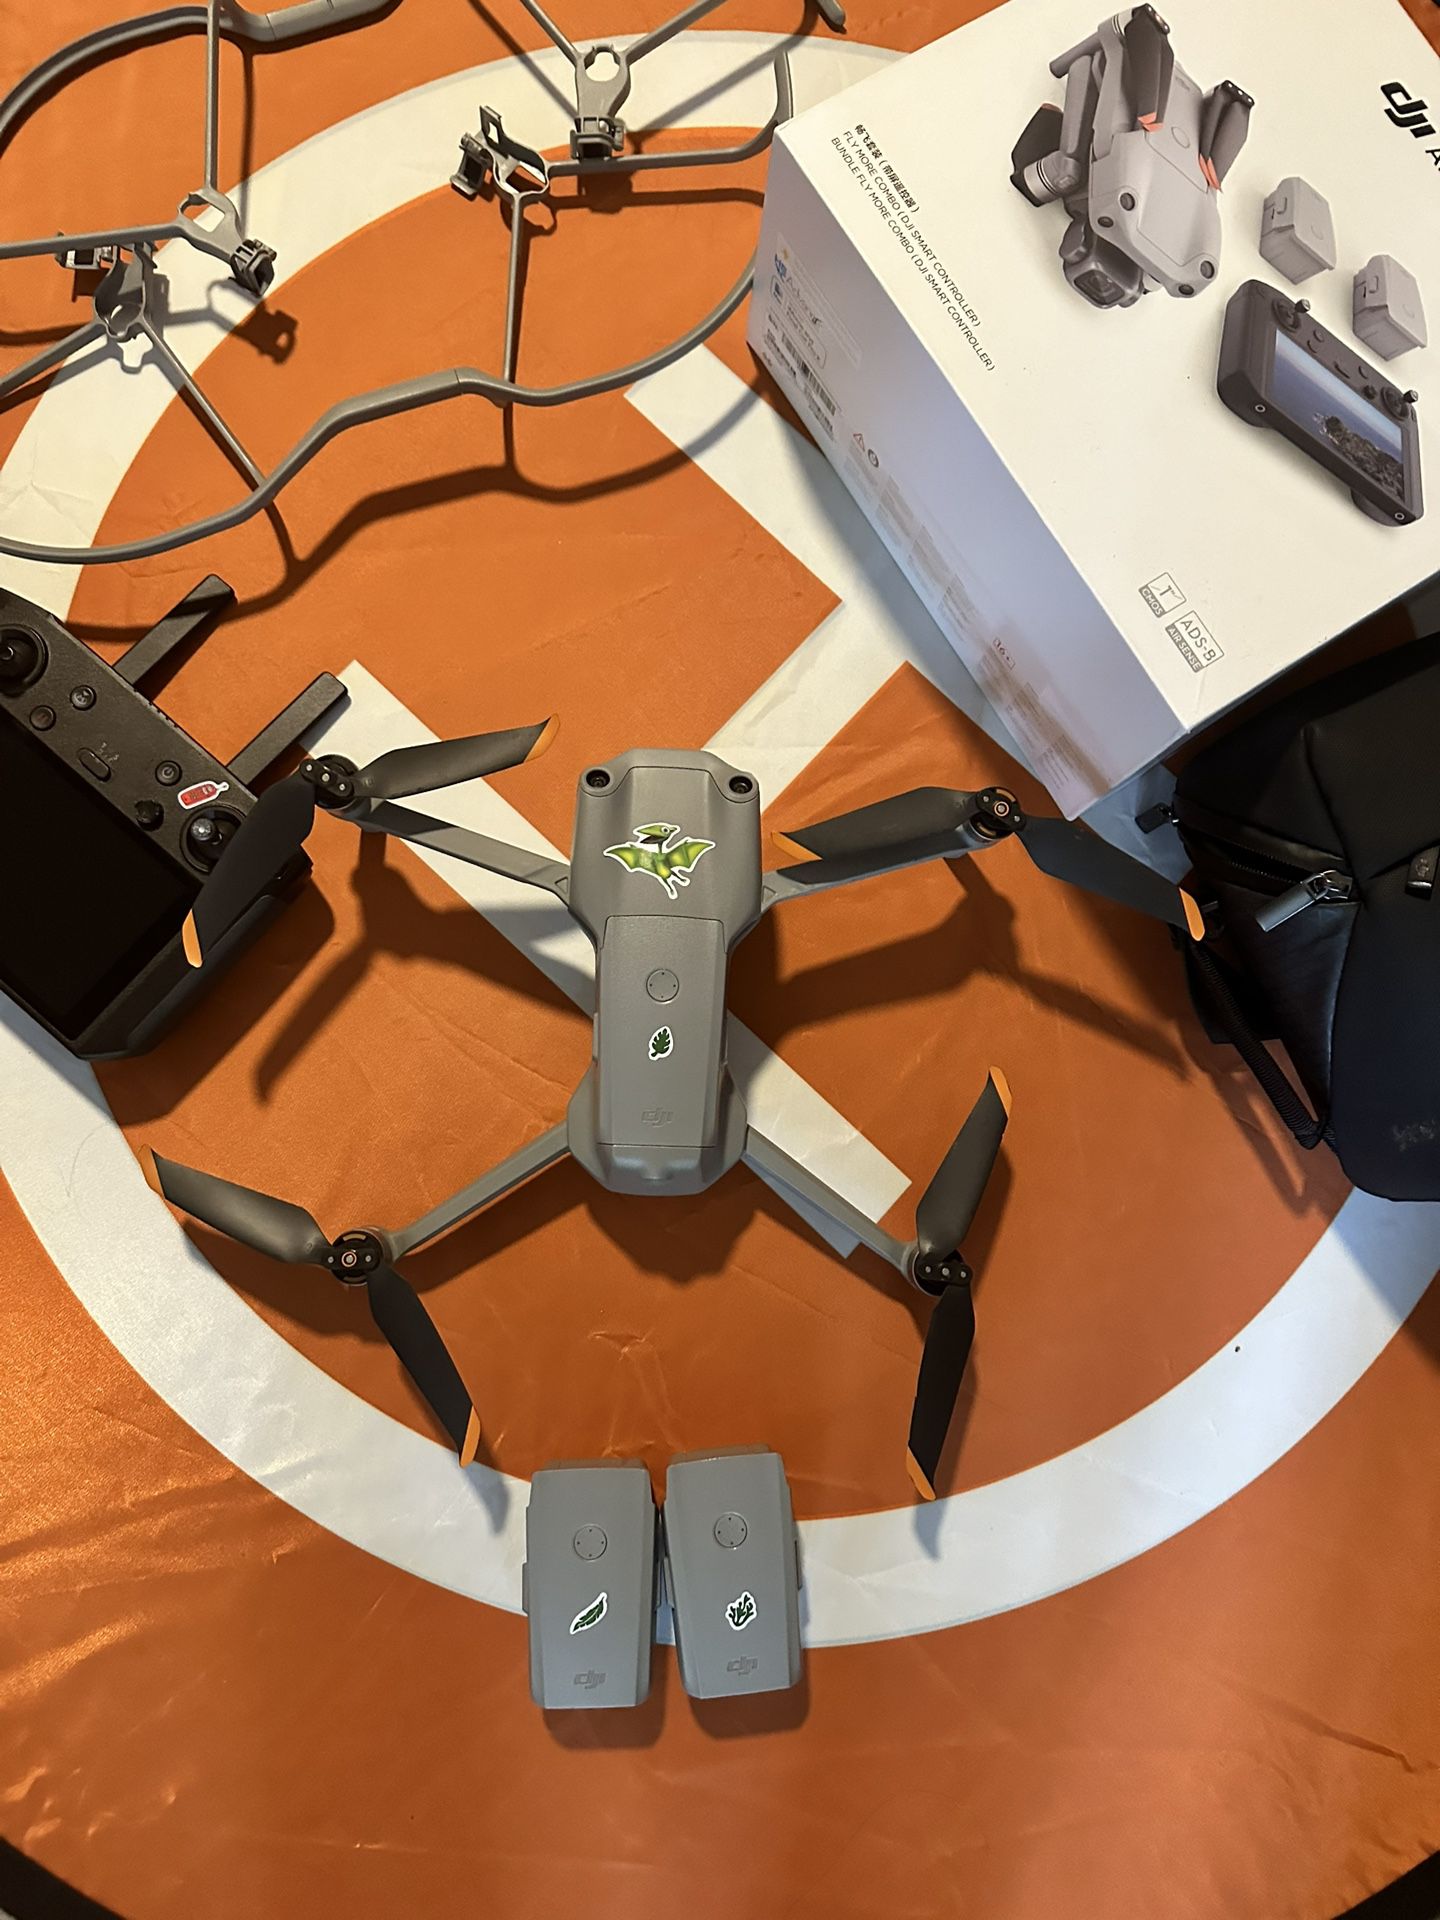 DJI Air 2S Fly More Combo Drone with Smart Controller